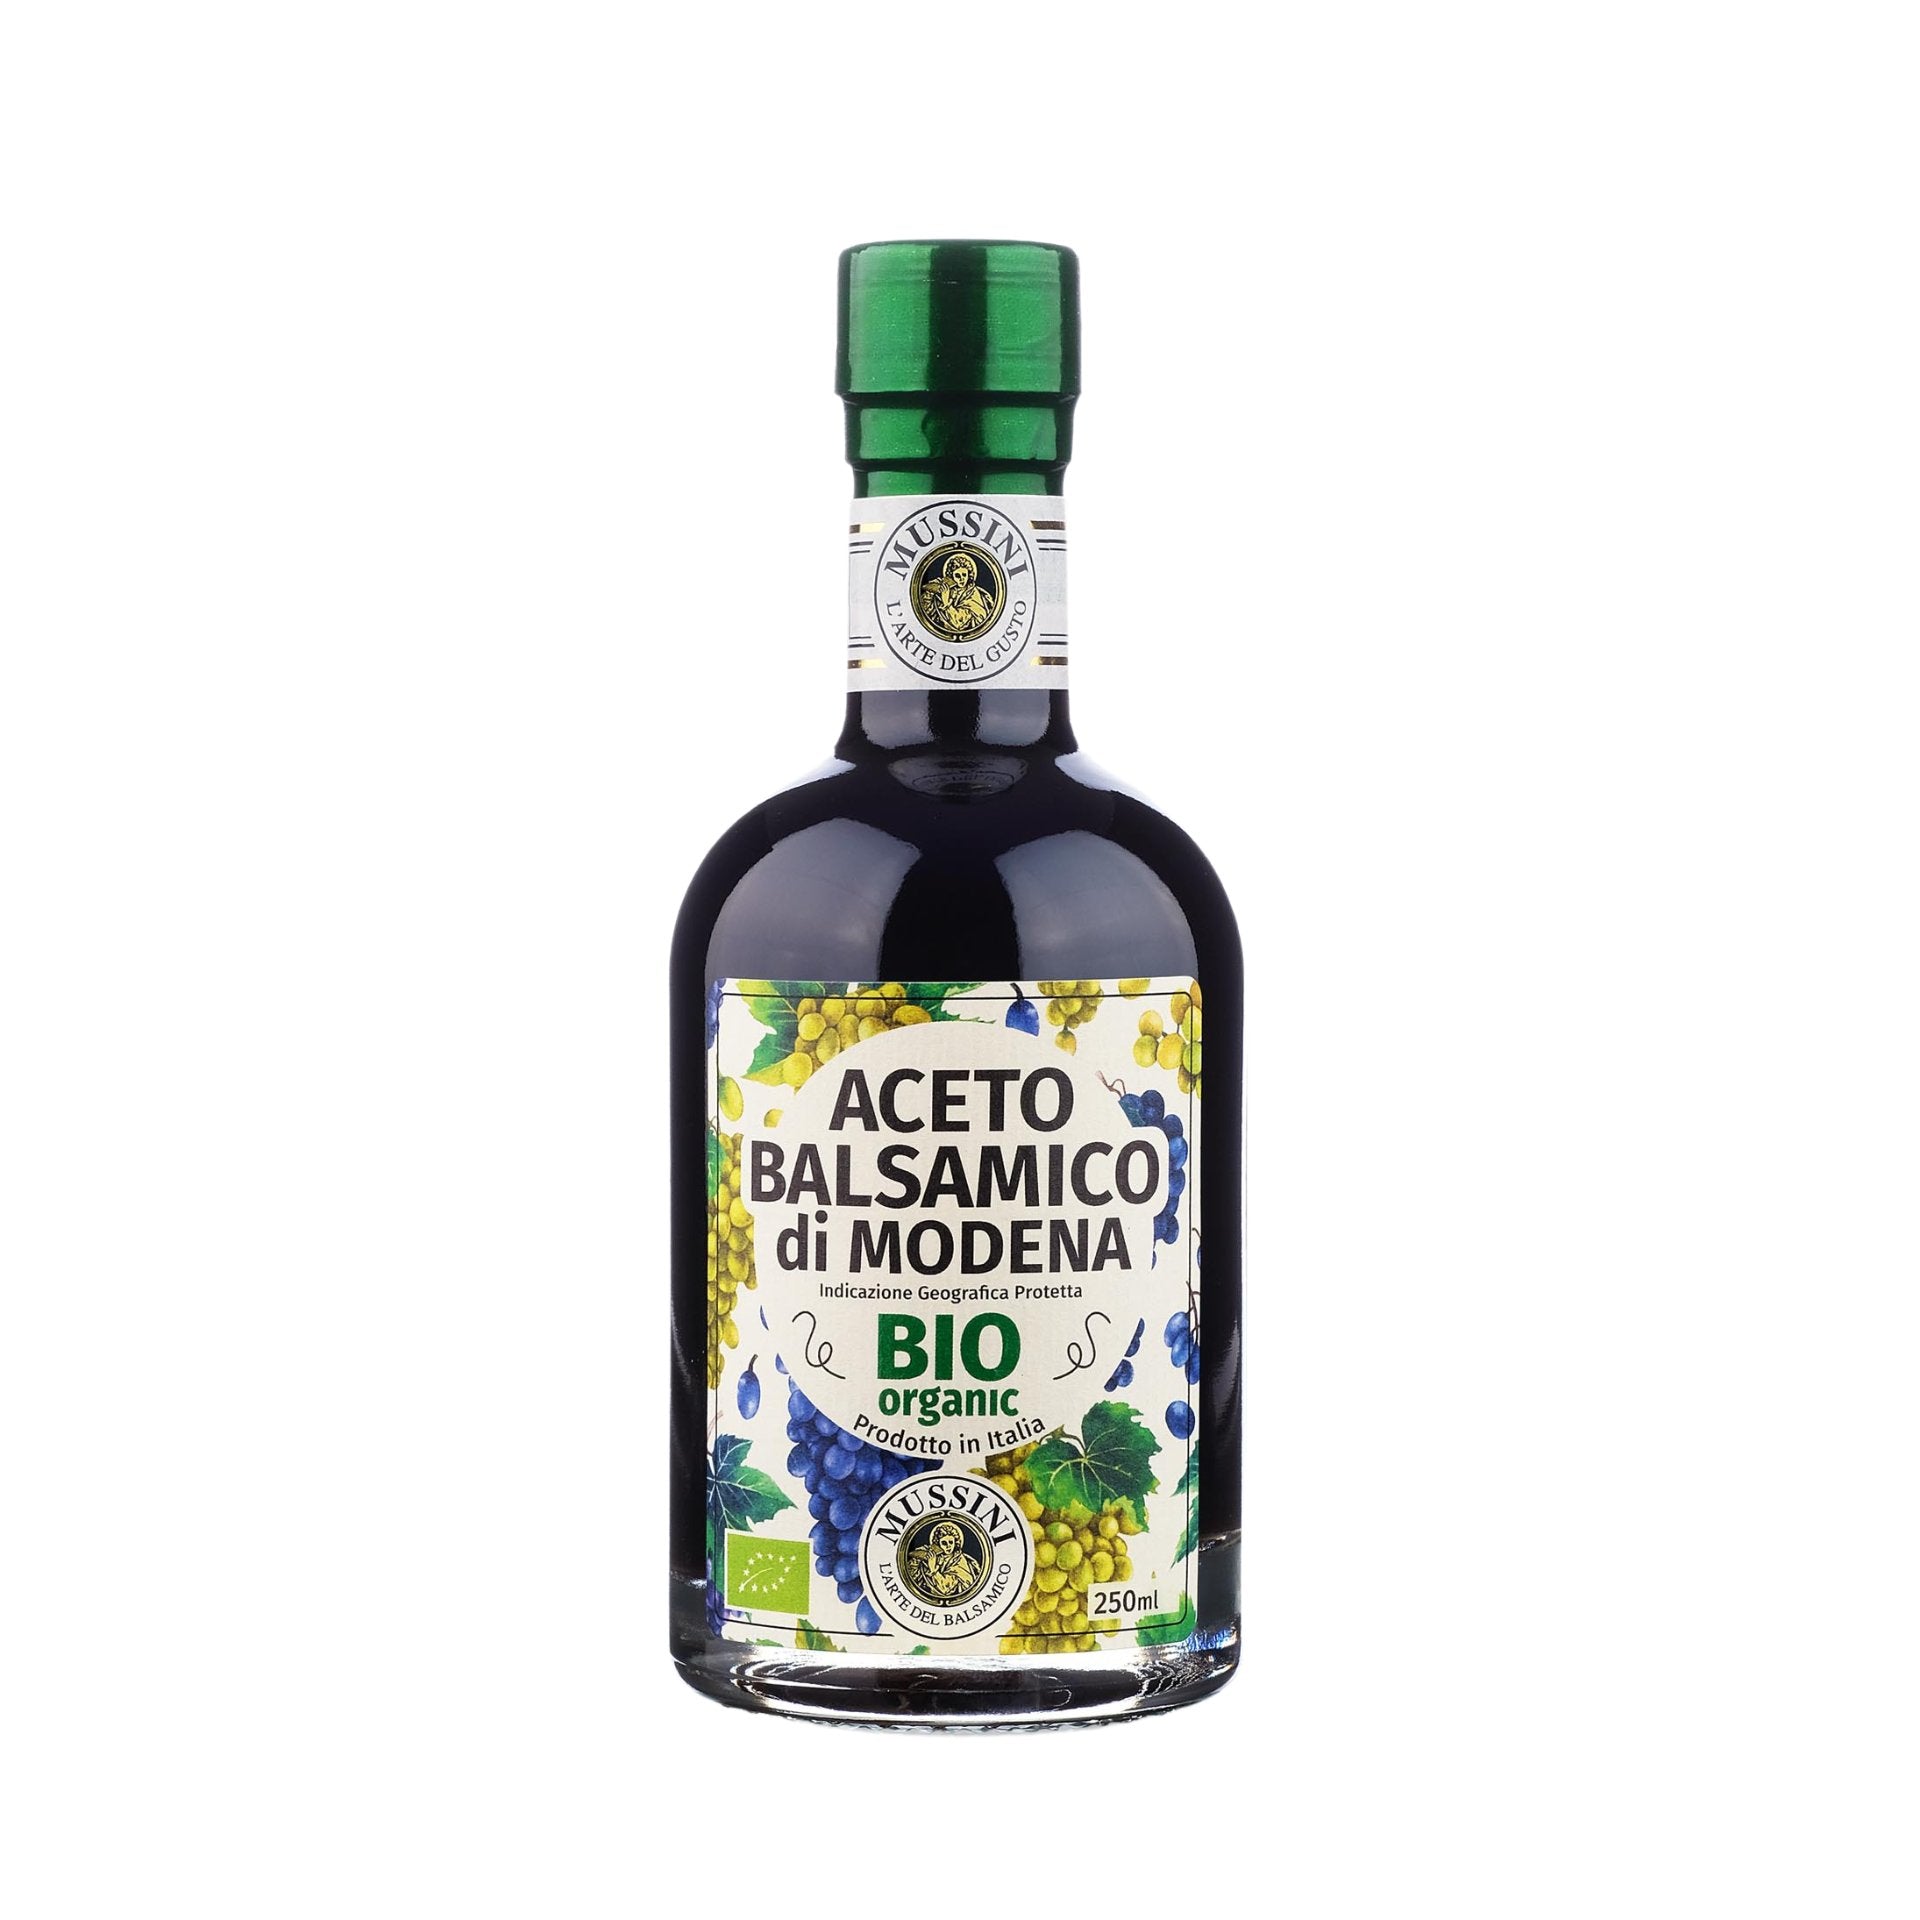 Mussini Organic IGP Balsamic Vinegar of Modena 1 Coin 250ml  | Imported and distributed in the UK by Just Gourmet Foods